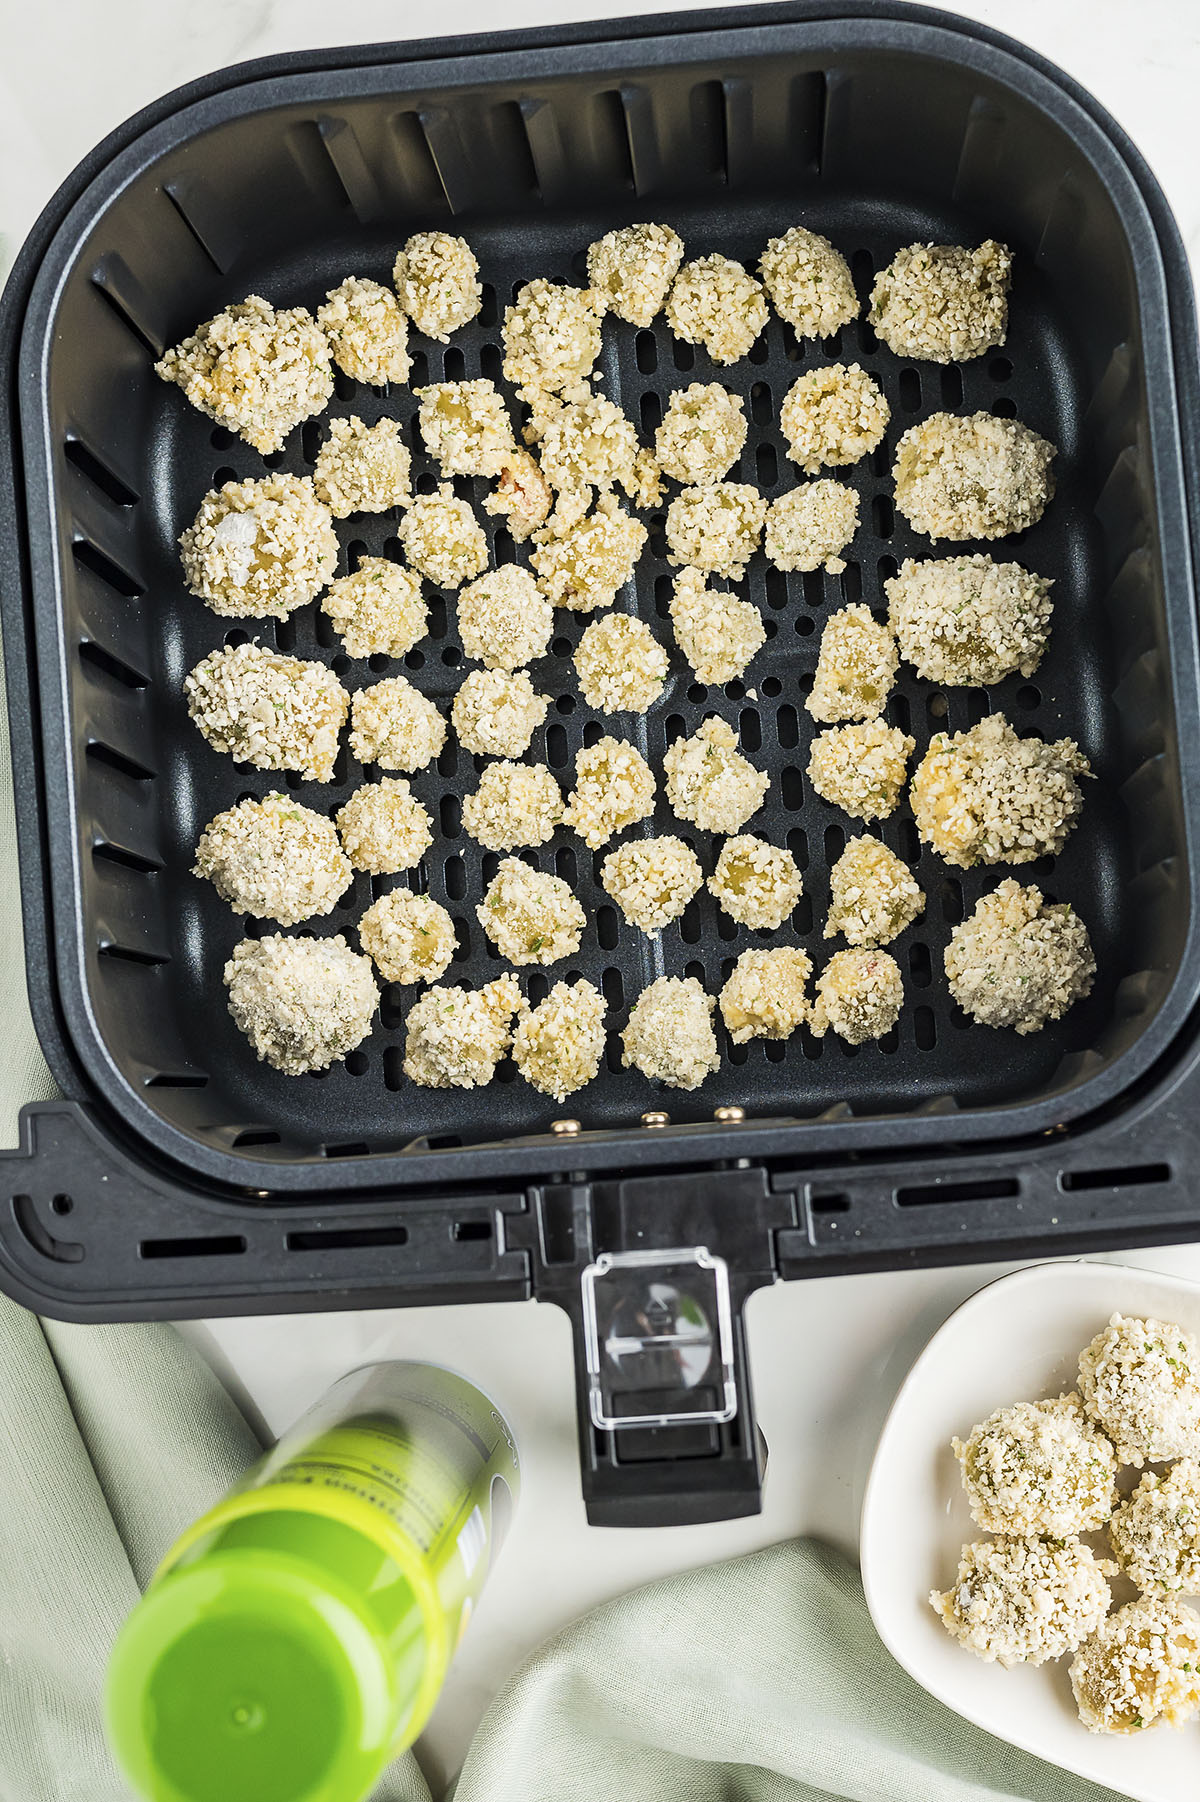 Uncooked fried olives in an air fryer basket.